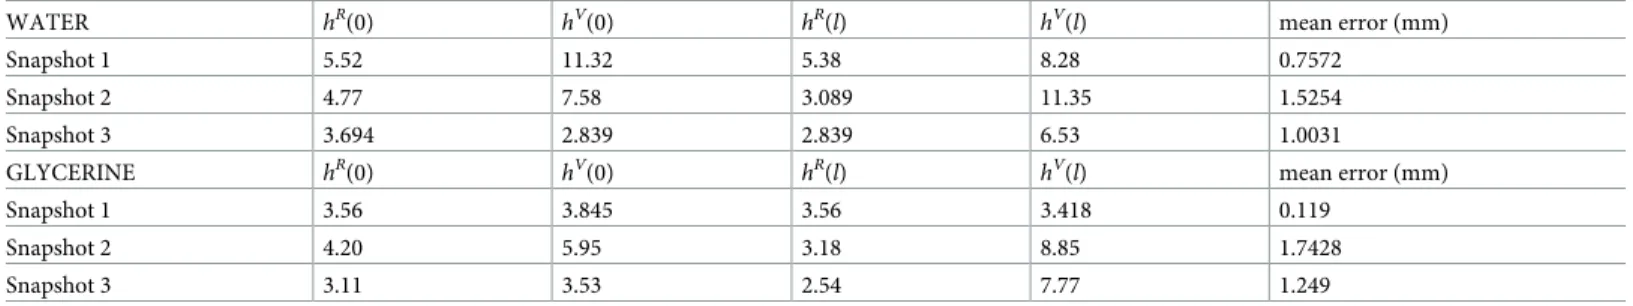 Table 3. Numerical results of the experimental validation. Snapshot number refer to the ones shown in Fig 8.